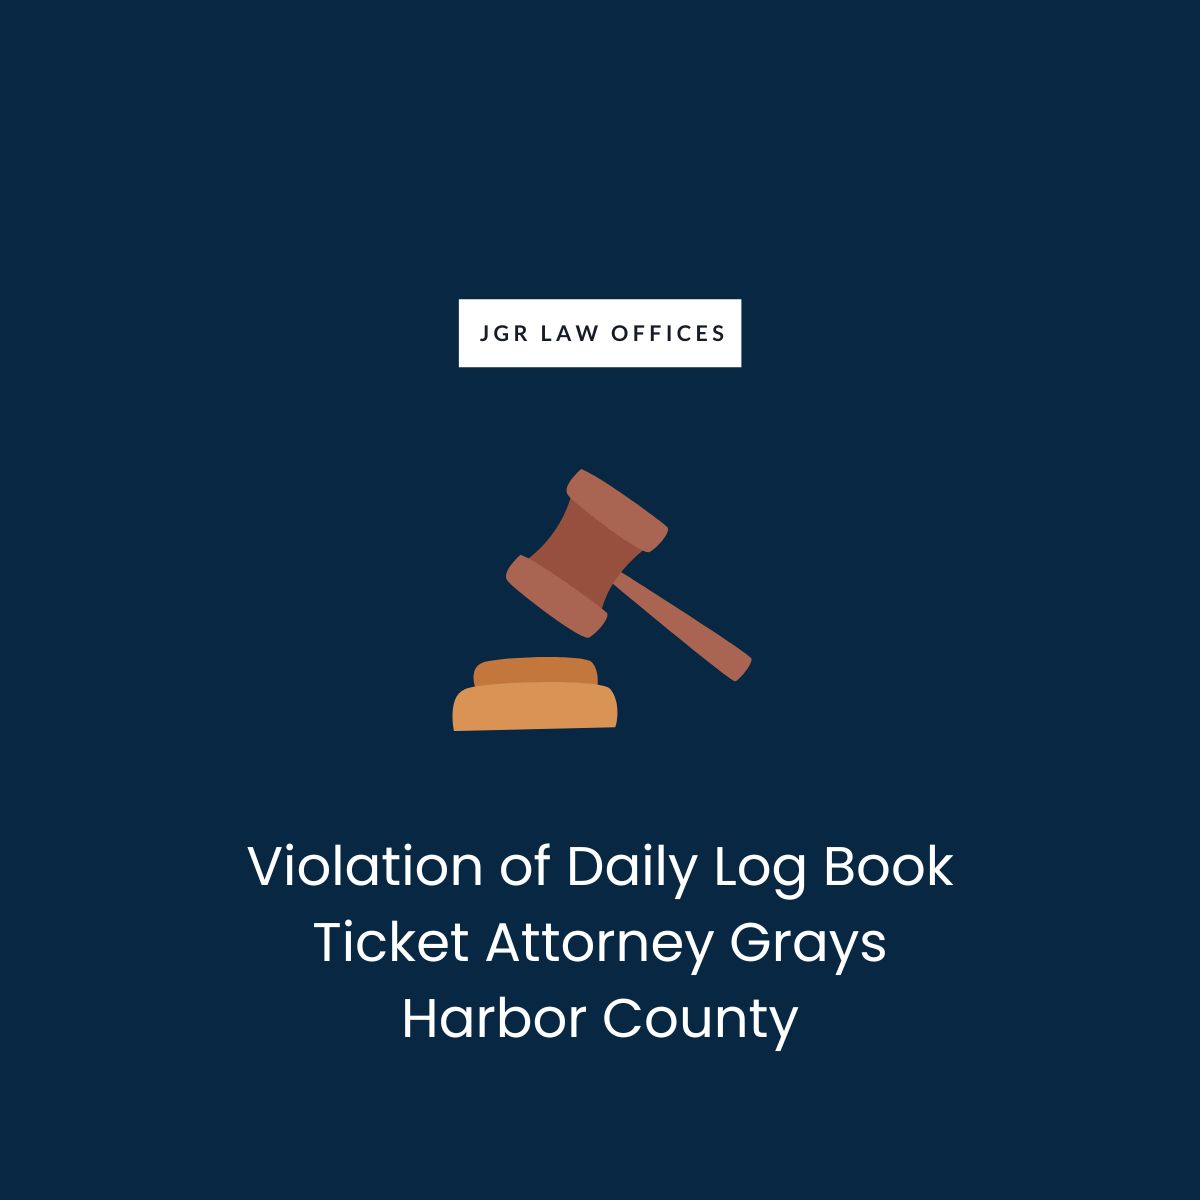 Violation of Daily Log Book Ticket Attorney Grays Harbor County